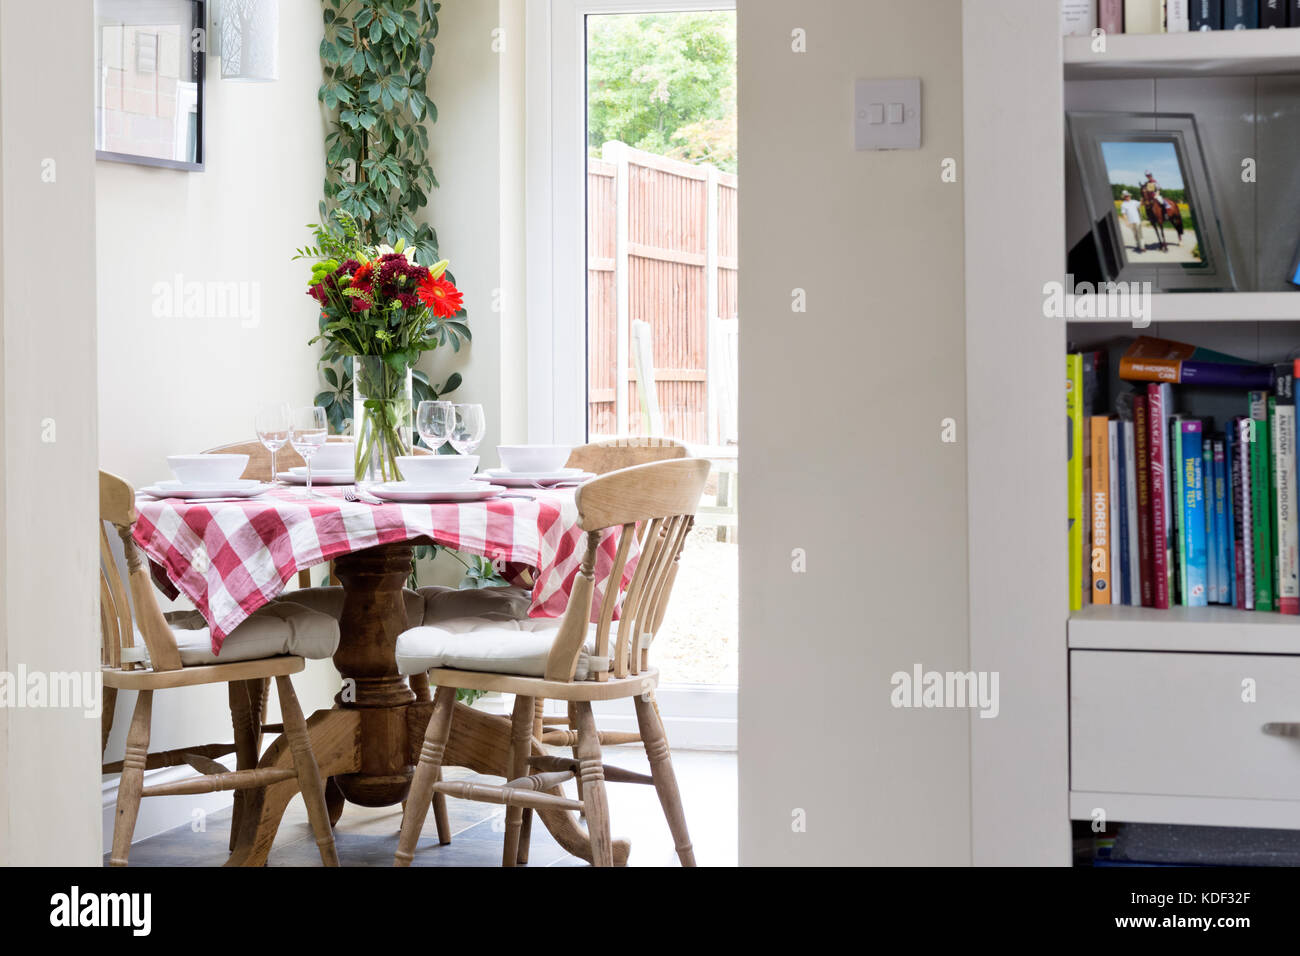 A small dining table with tablecloth set for lunch in a domestic dining room. Stock Photo